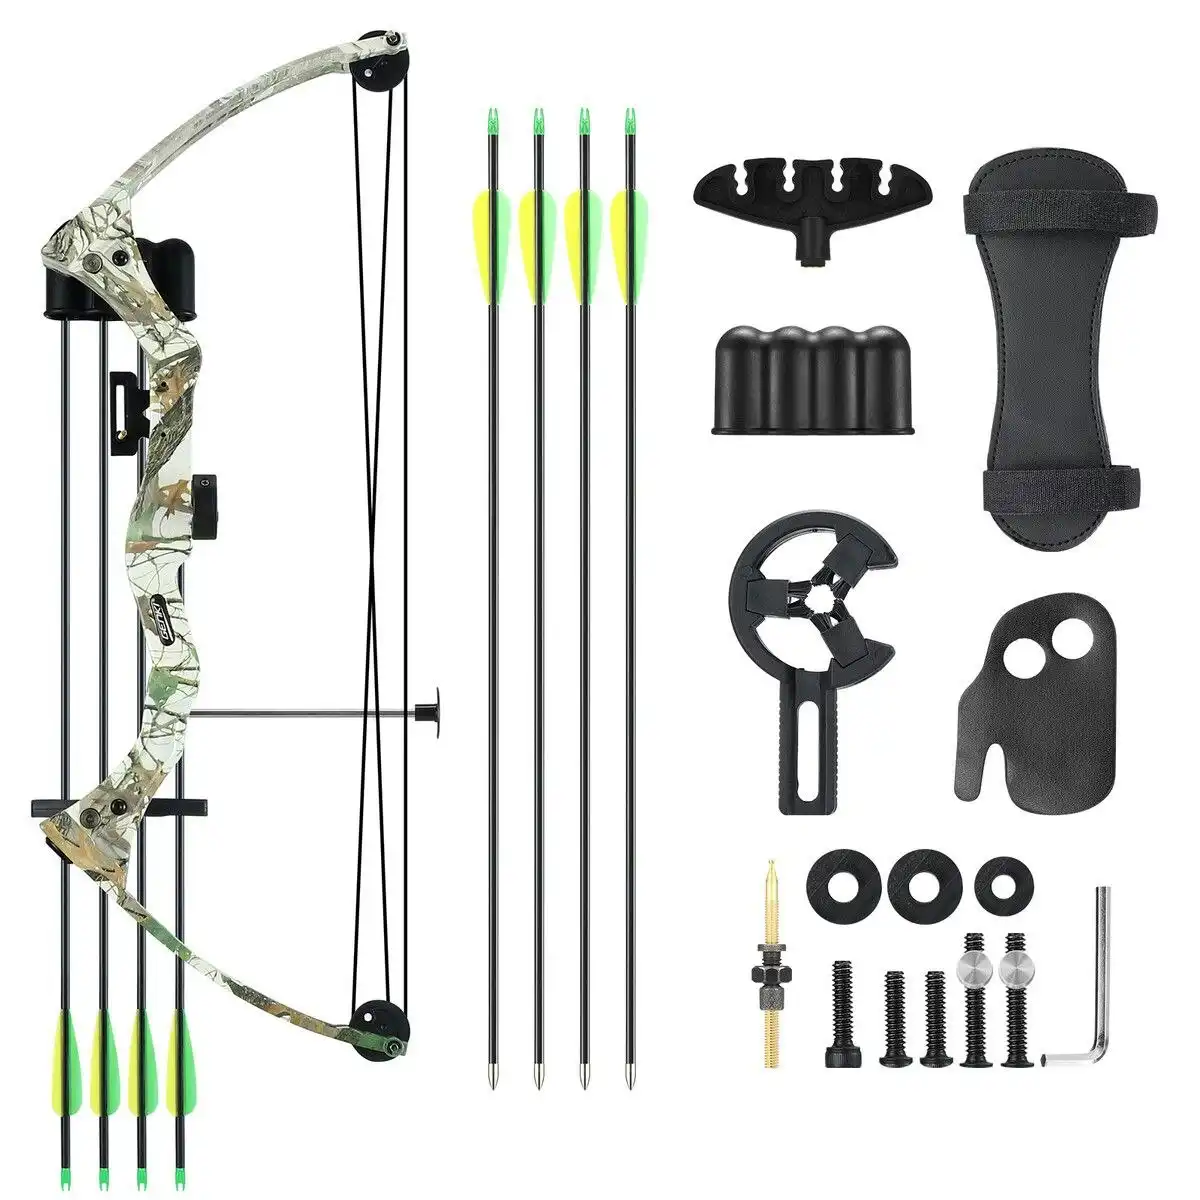 Ausway Compound Bow Arrow Set 15-20lbs Archery Sports Hunting Target Shooting RH Adjustable Speed for Youth Beginner Practice Camo